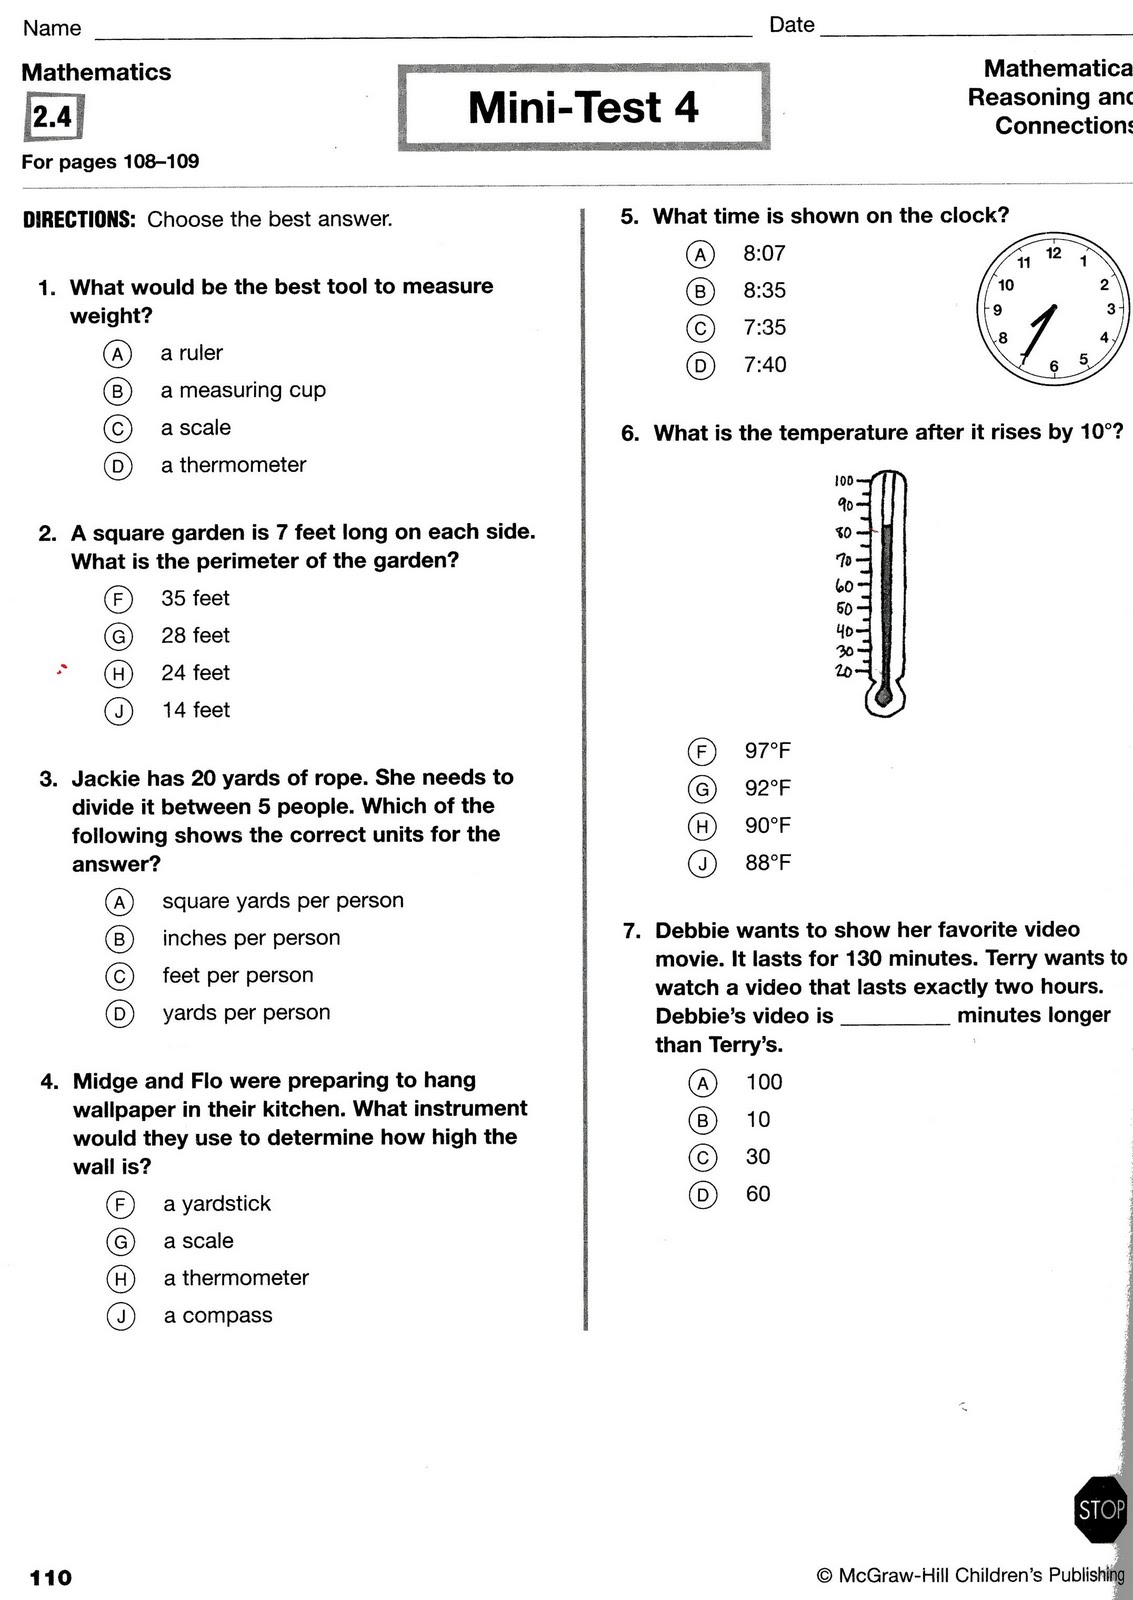 18 Best Images Of 3rd Grade Science Matter Worksheets 2nd Grade Insect Worksheets 7th Grade